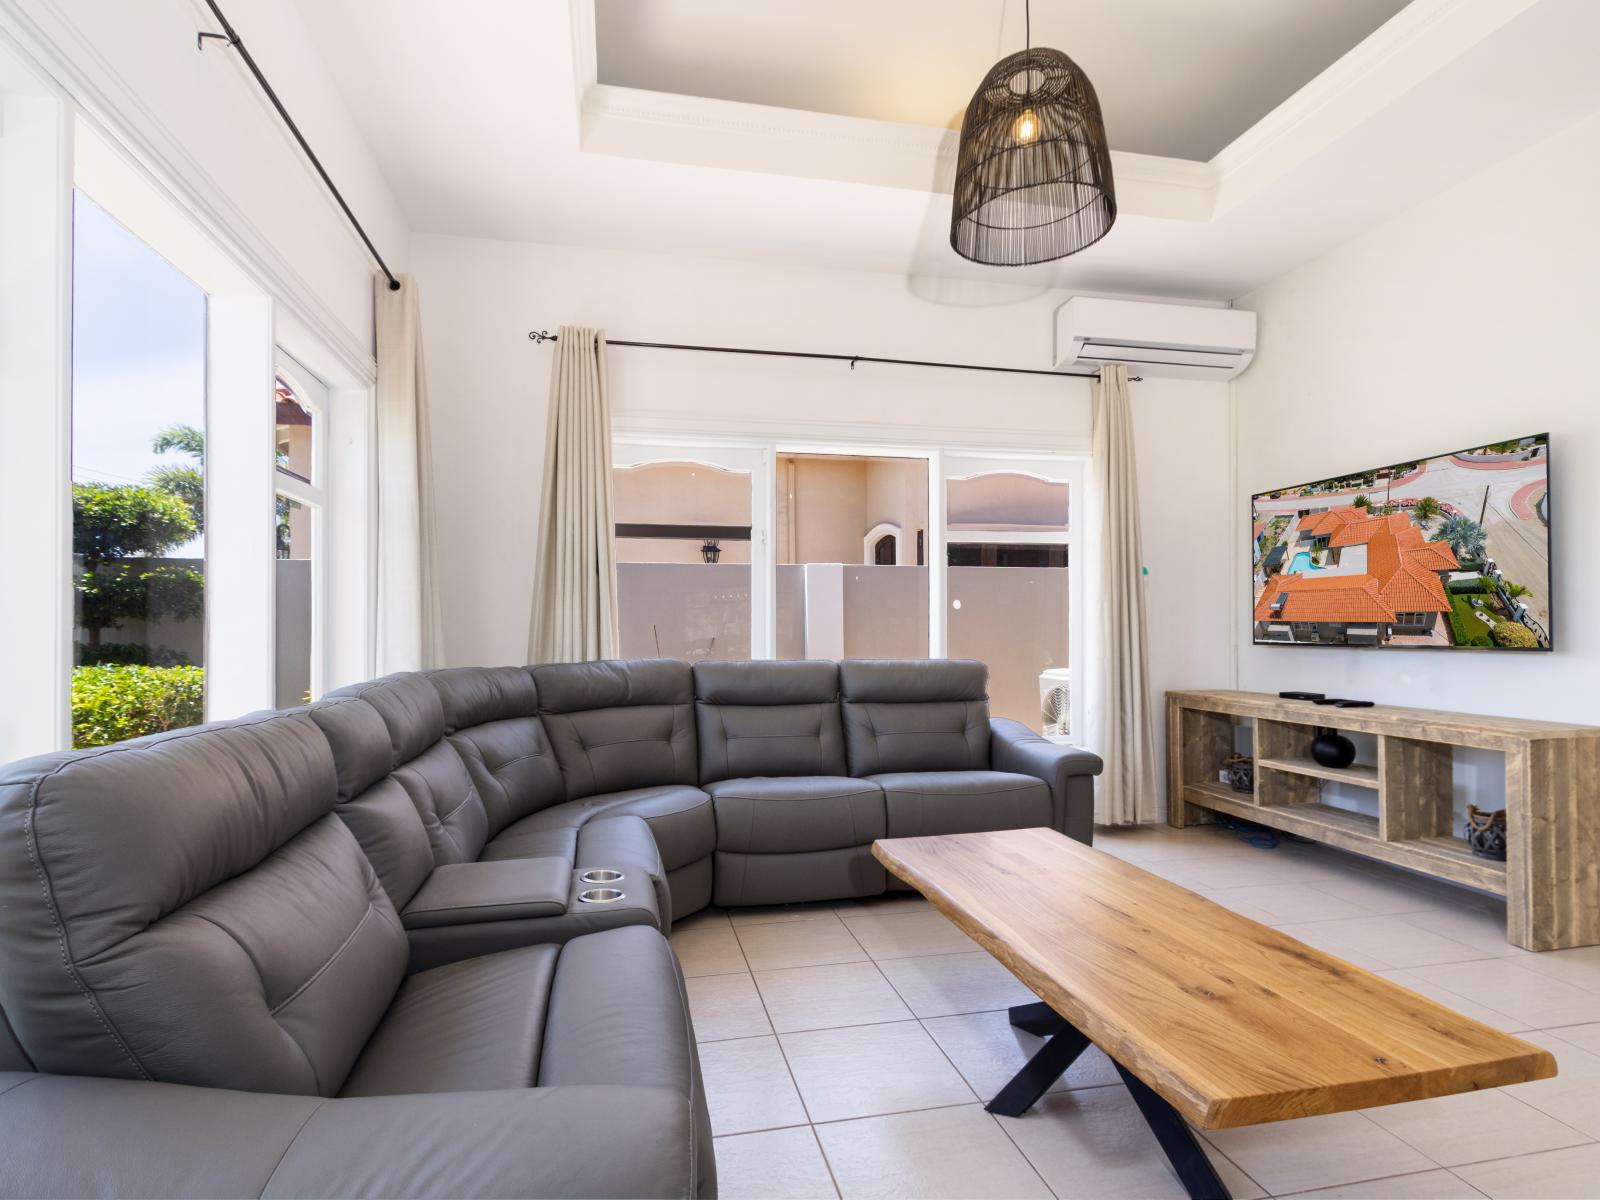 Living Area of the Apartment in Noord Aruba - Comfortable Sofa - Well-chosen lighting fixtures adding both functionality and charm - Smart TV and Netflix - Open-concept living area seamlessly connected to a stylish dining space